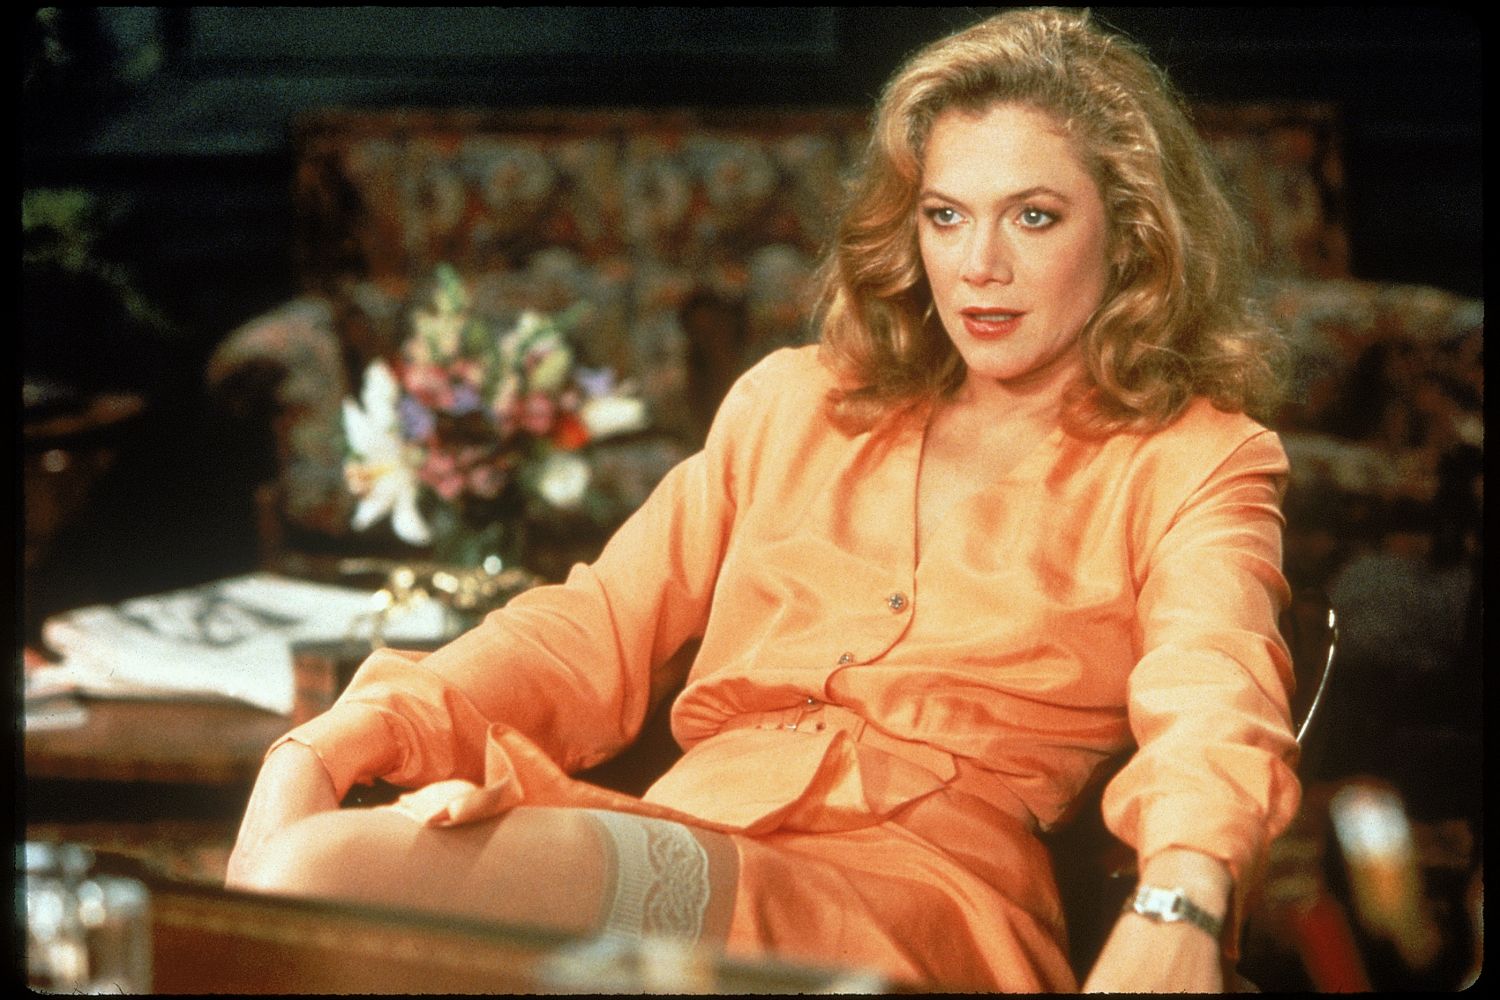 kathleen turner, images, image, wallpaper, photos, photo, photograph, galle...